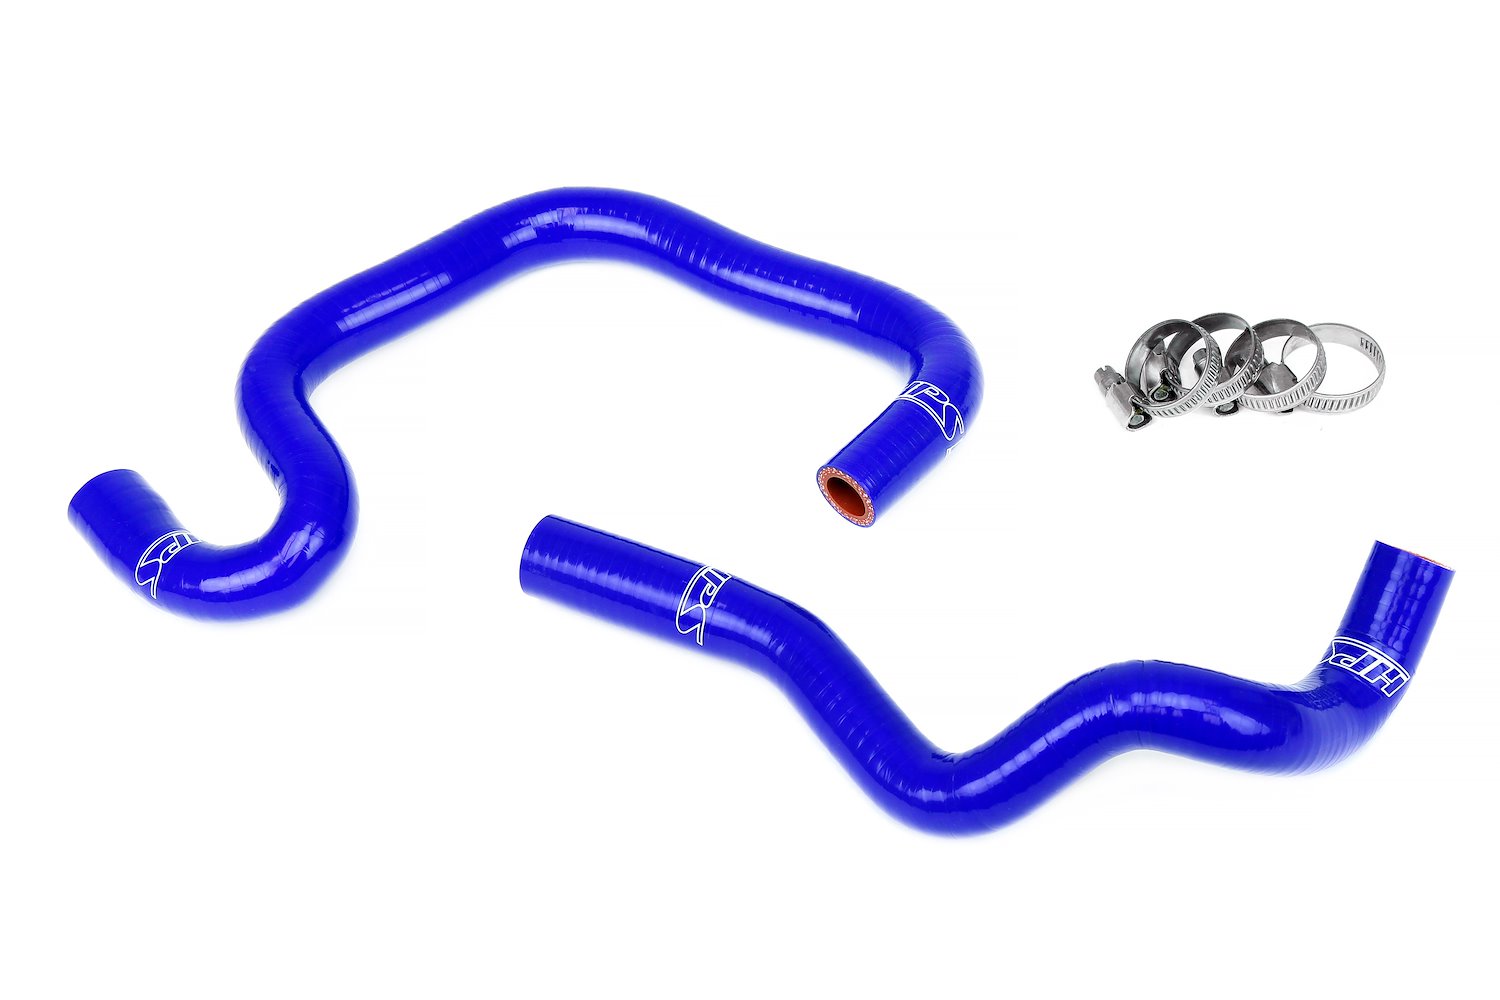 57-1082-BLUE Heater Hose Kit, 3-Ply Reinforced Silicone, Replaces Rubber Heater Coolant Hoses